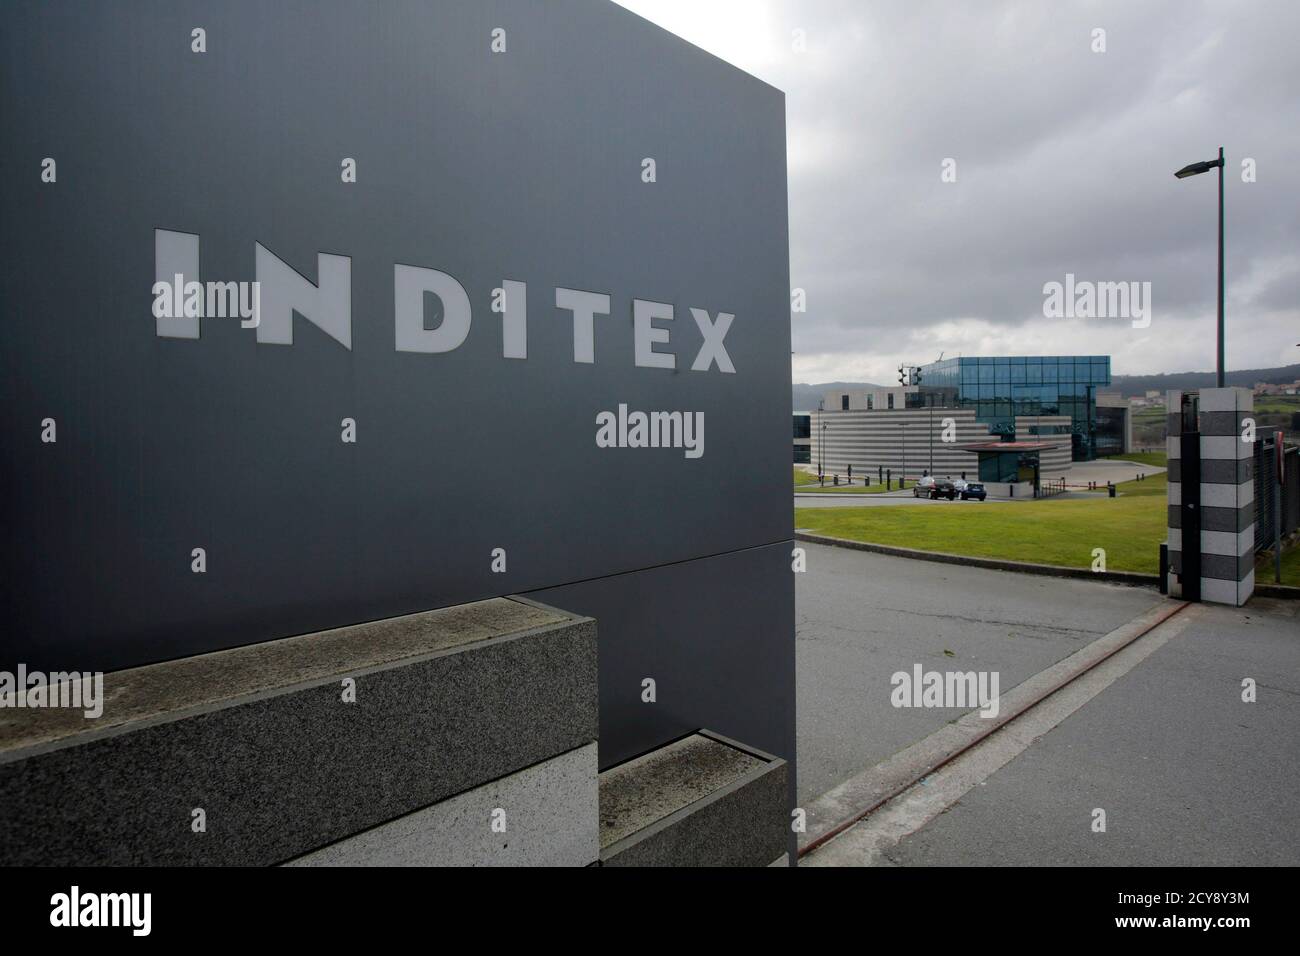 The entrance of the Zara factory, the headquarters of Inditex group, is  seen in Arteixo, northern Spain, March 18, 2015. Spanish group Inditex,  owner of the Zara fashion chain, expects to trim